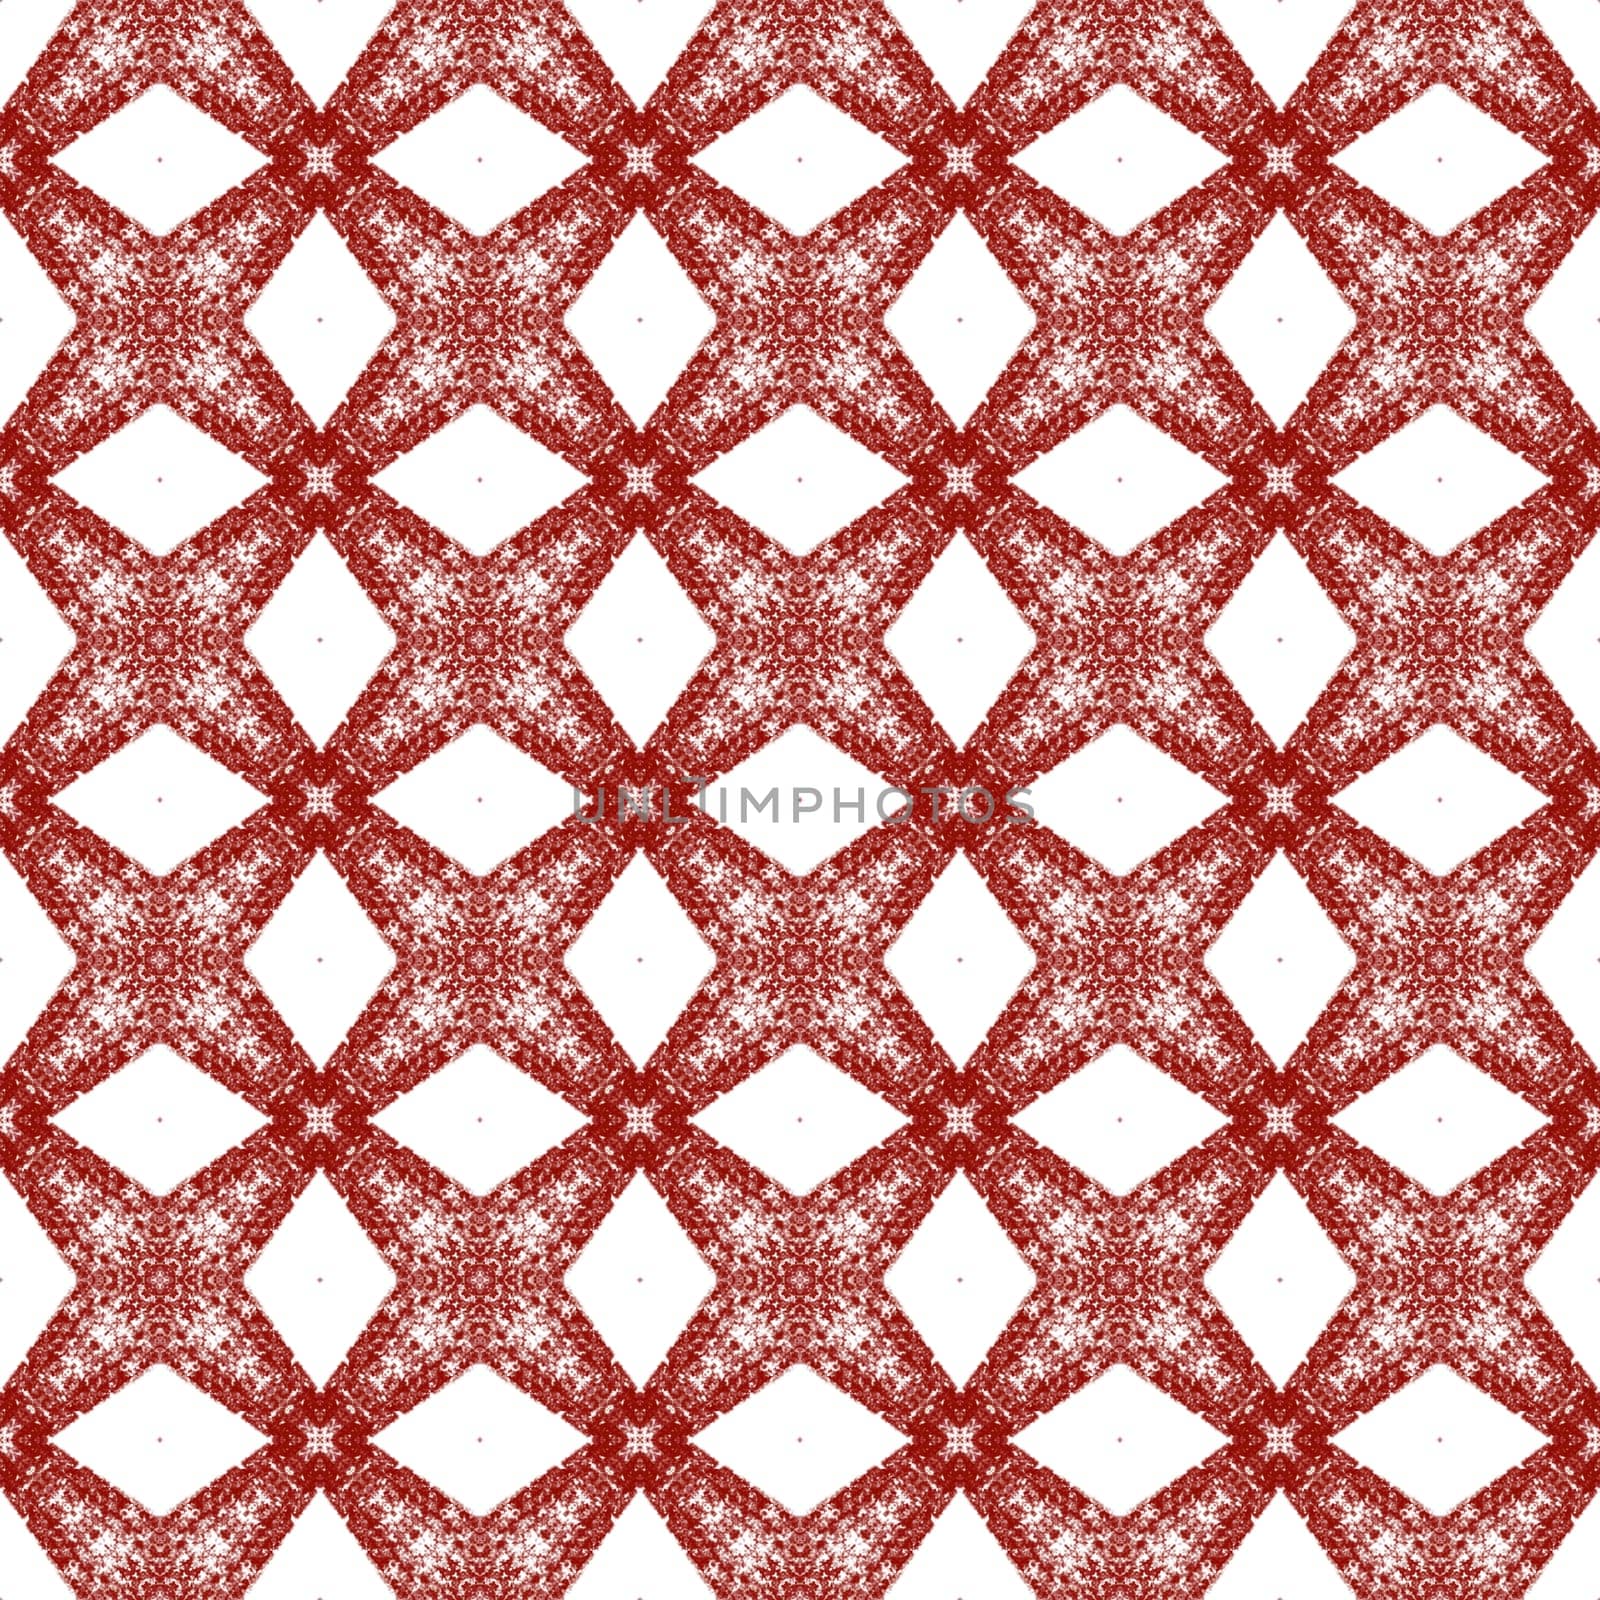 Medallion seamless pattern. Wine red symmetrical by beginagain